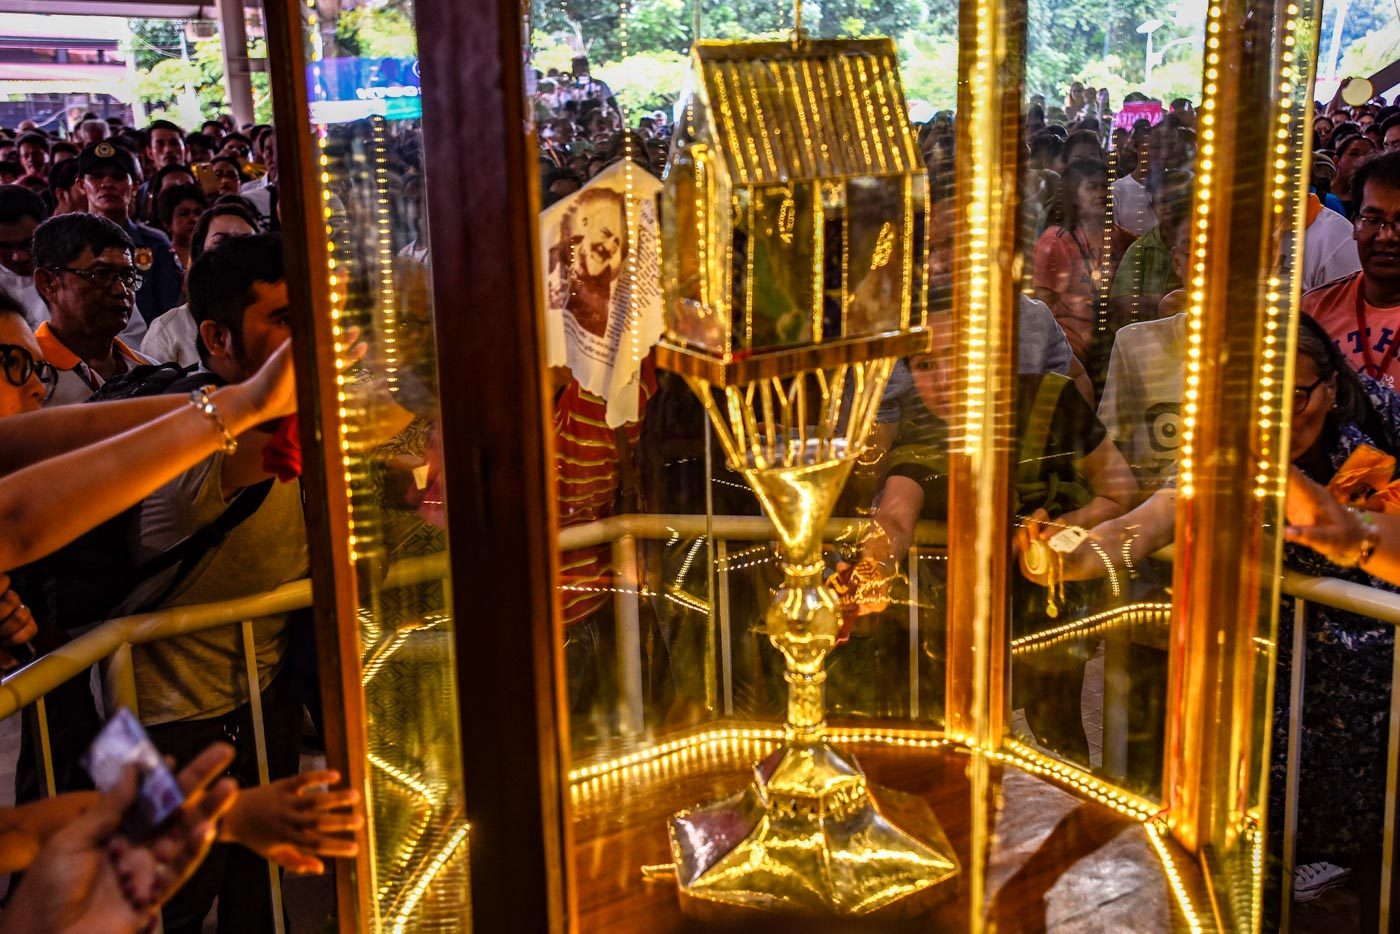 CLOSER VIEW. Devotees crowd around the relic Photo by Maria Tan/Rappler  